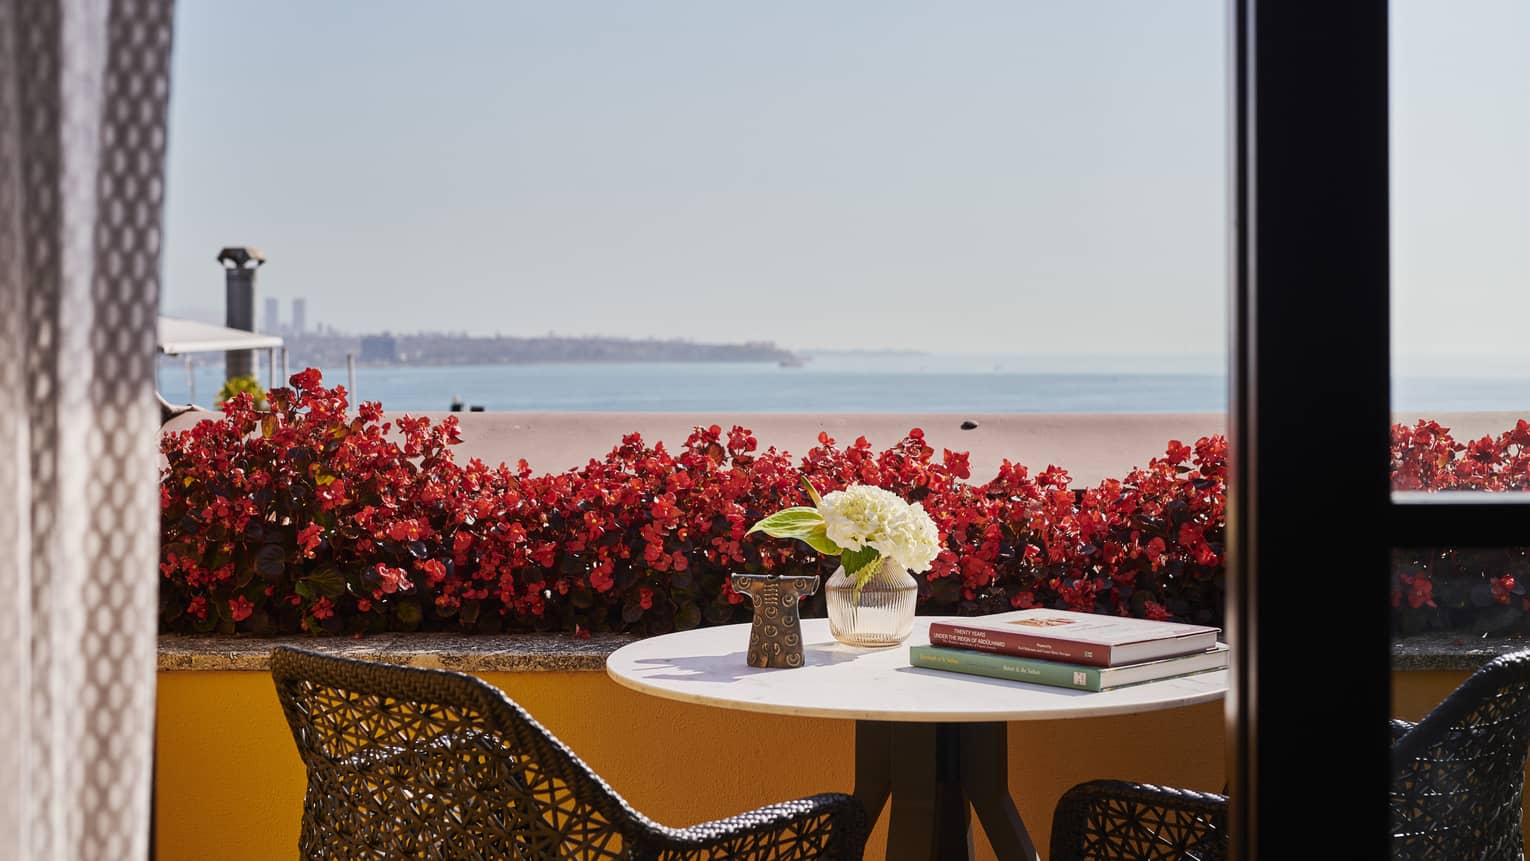 Bistro dining set on orange-walled terrace looking over planter box filled with red flowers to water view